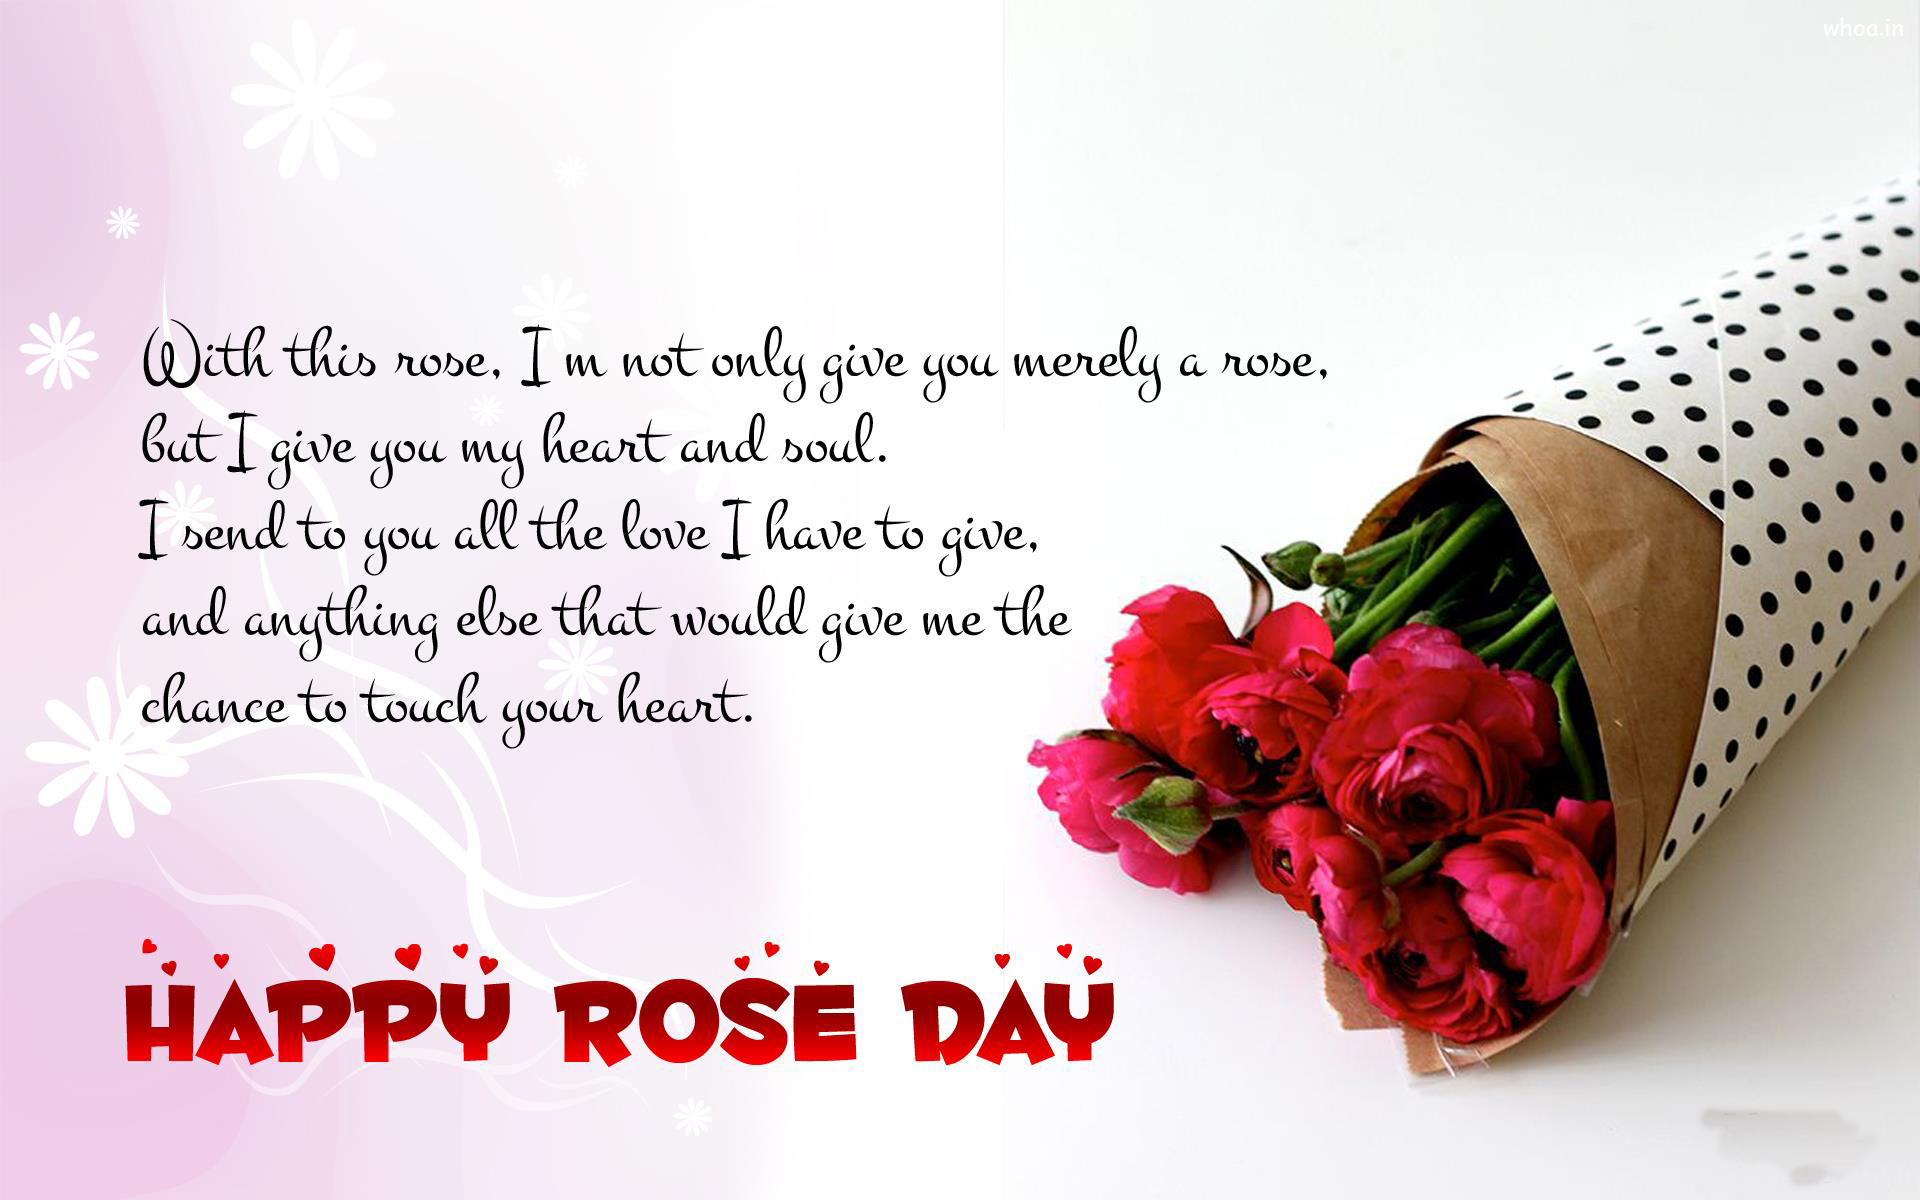 Rose Day Quotes Wallpaper - Romantic Rose Day Wishes - HD Wallpaper 